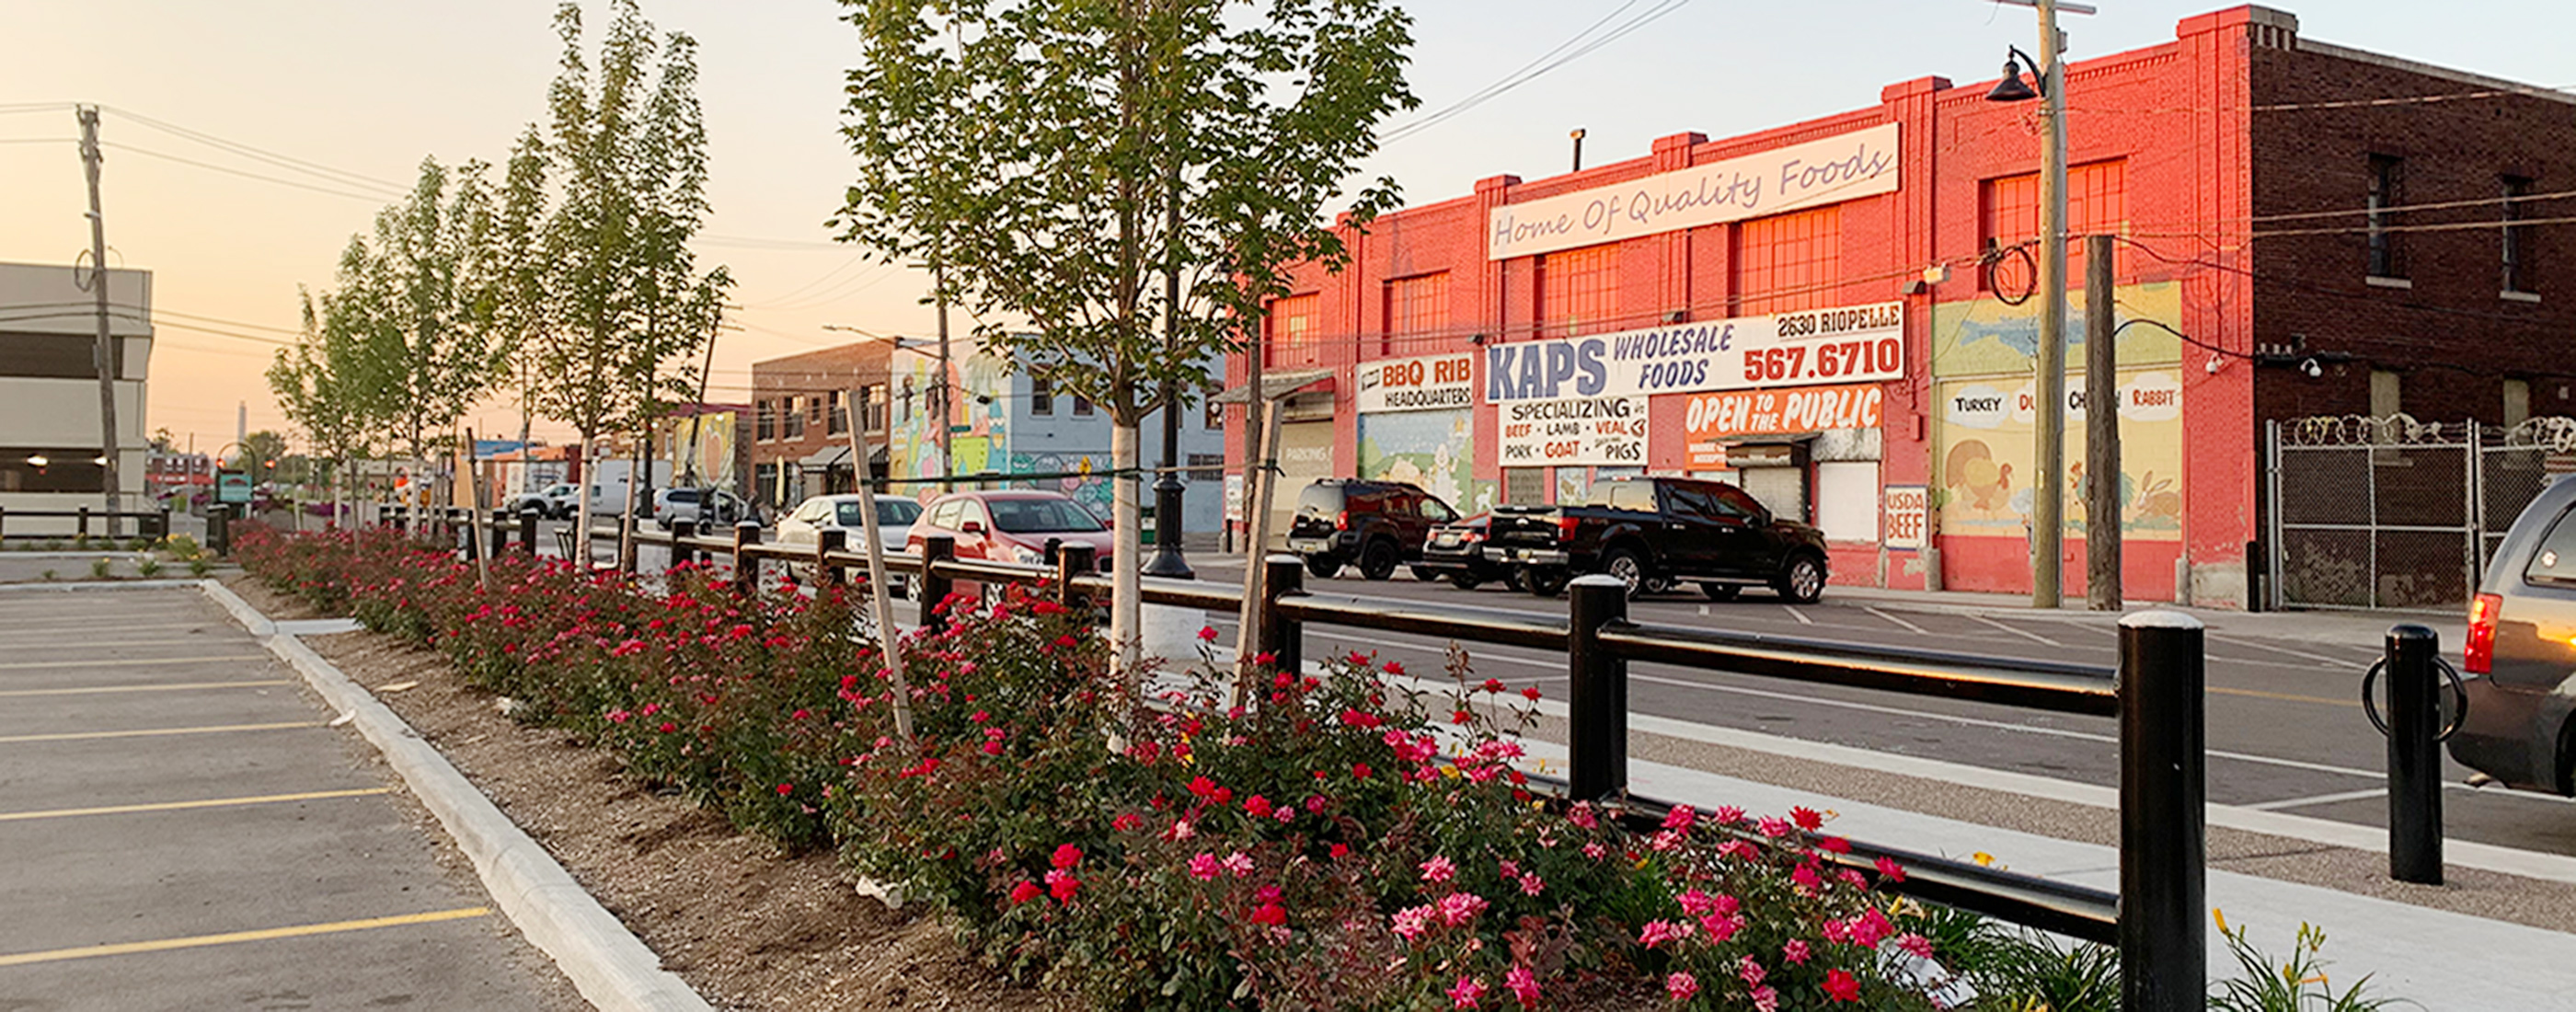 View of storefronts and new streetscaping along Riopelle Street in Detroit, MI